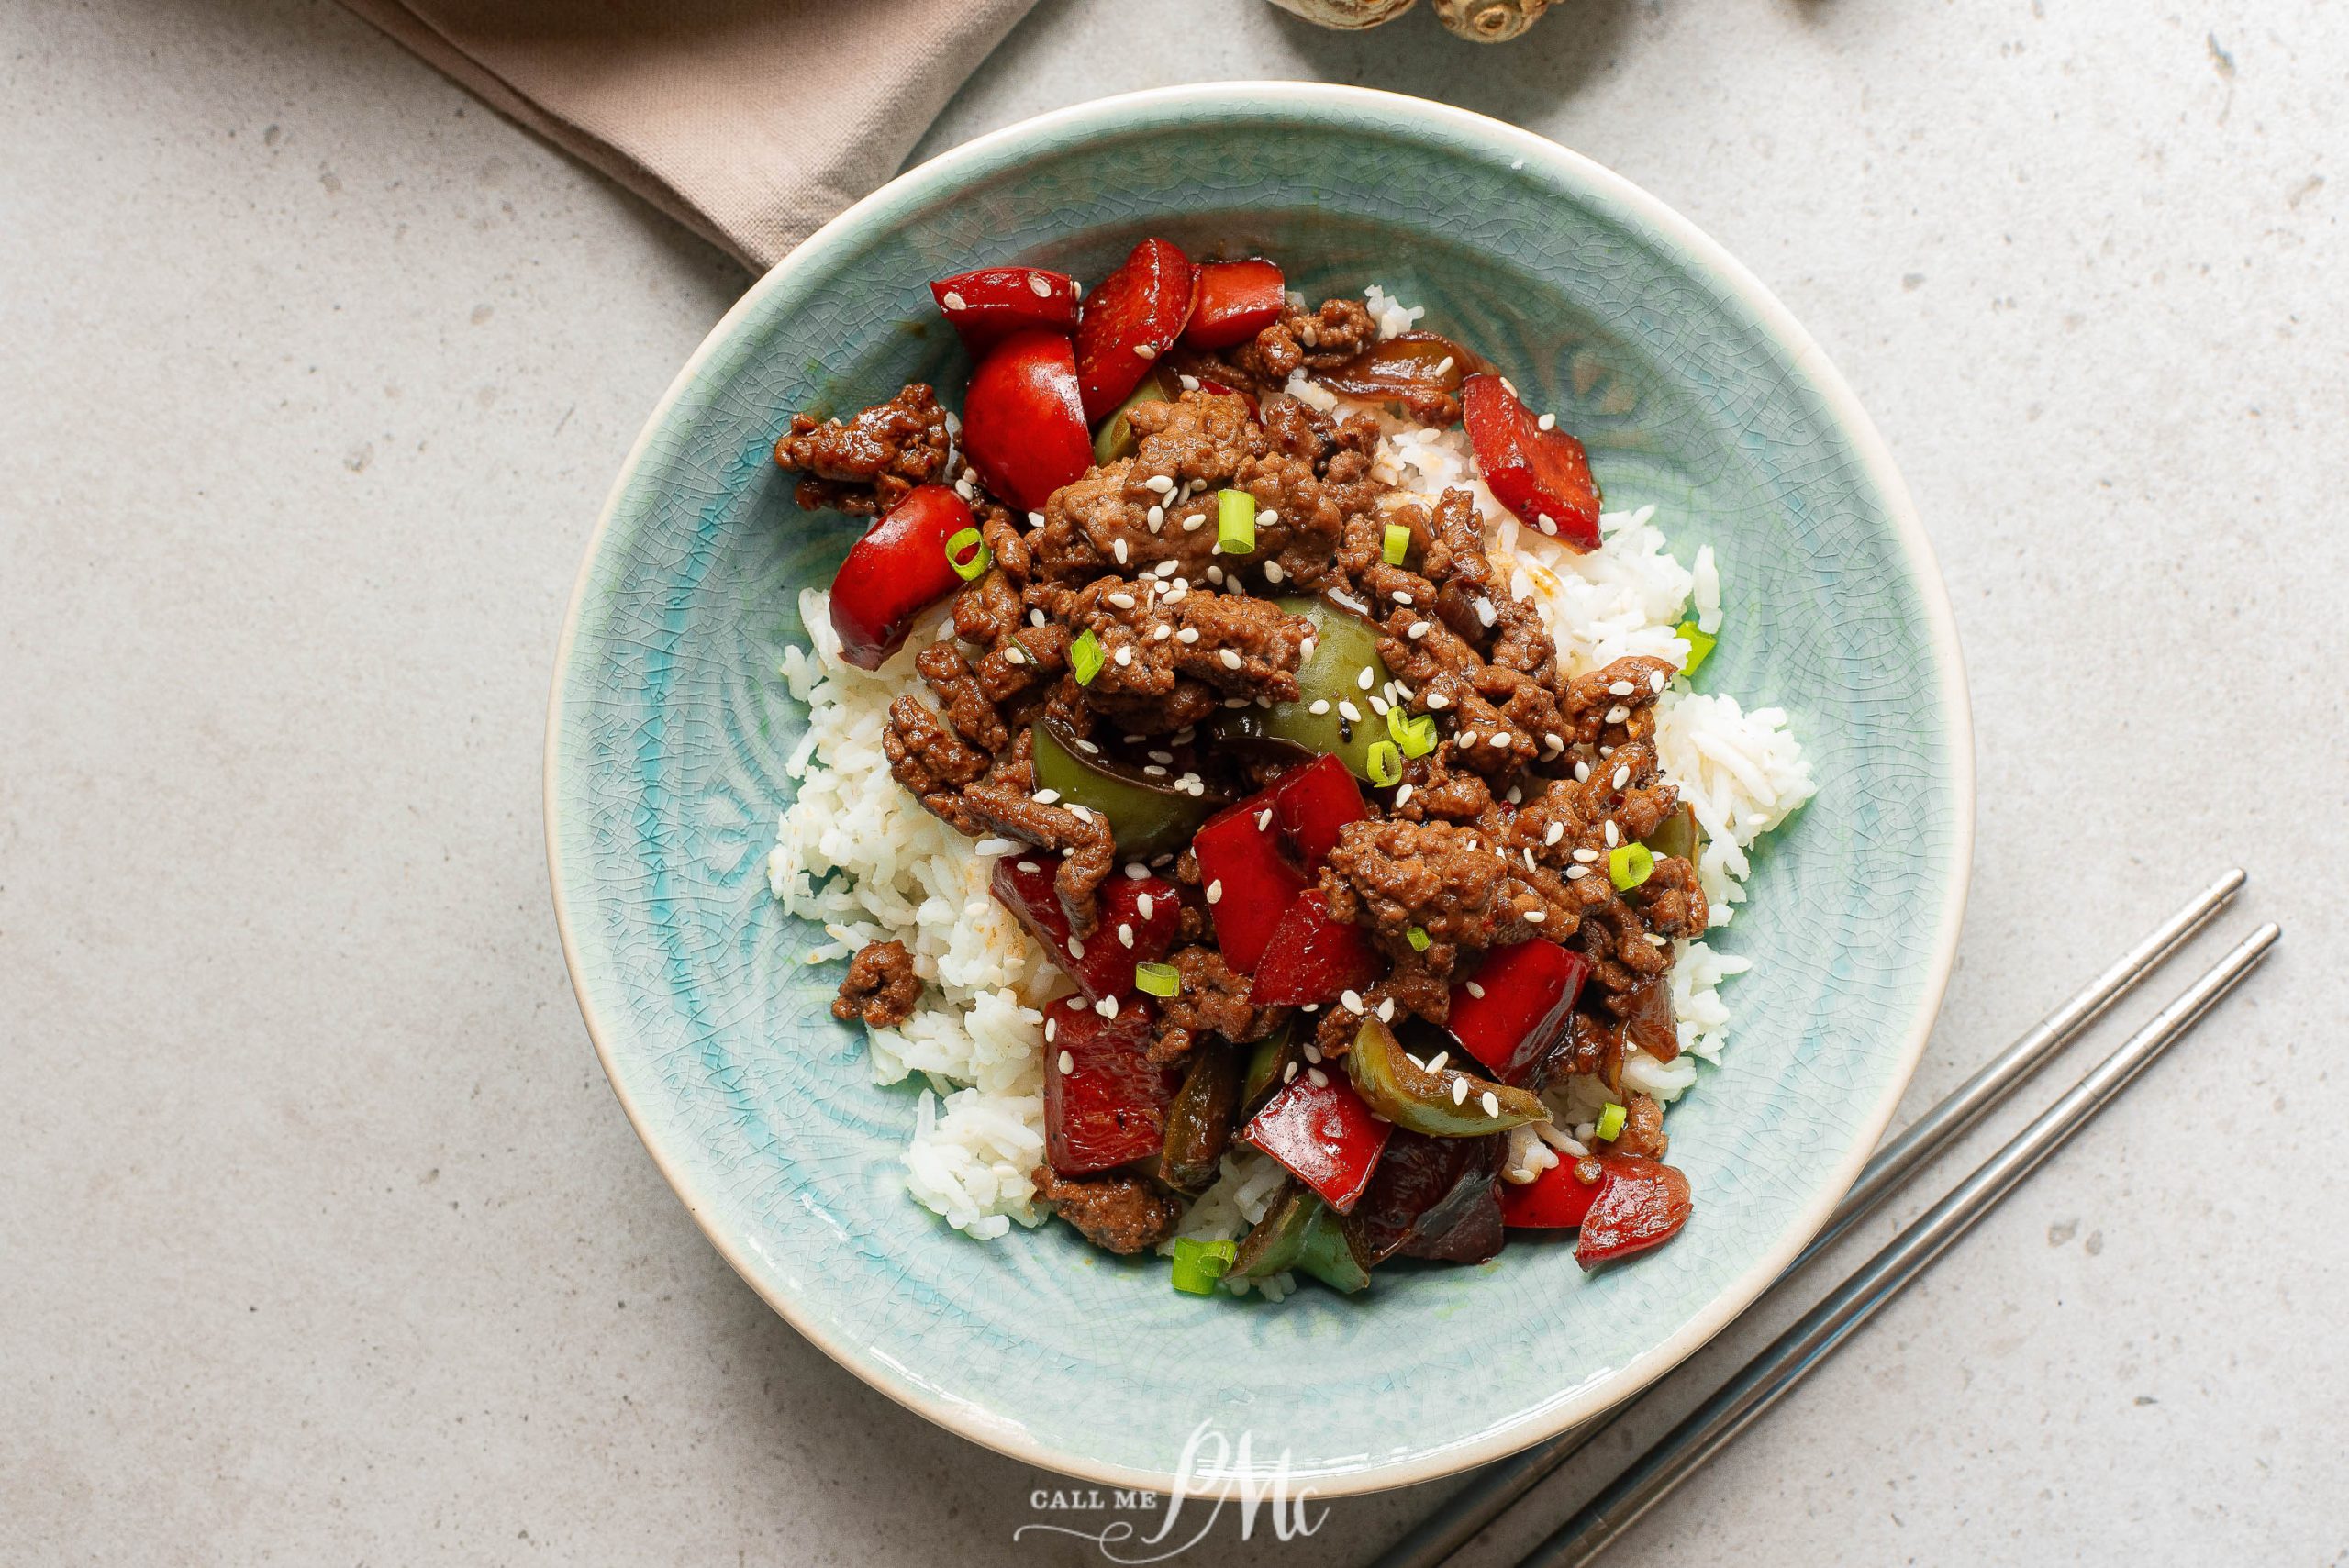 A bowl of beef stir fry with rice and peppers.